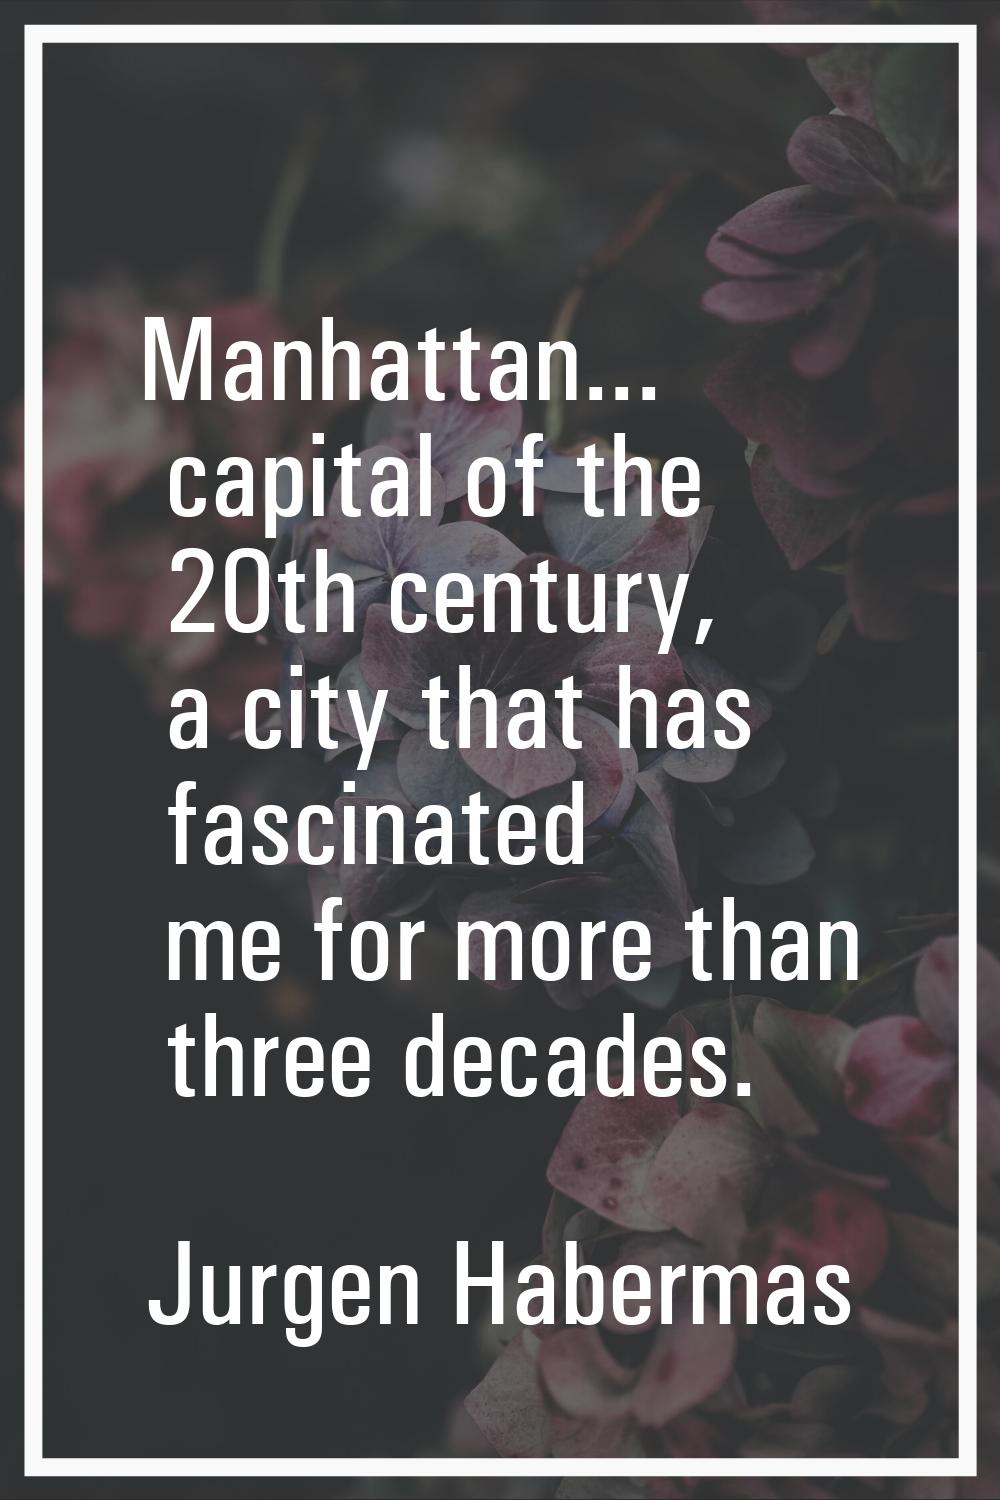 Manhattan... capital of the 20th century, a city that has fascinated me for more than three decades